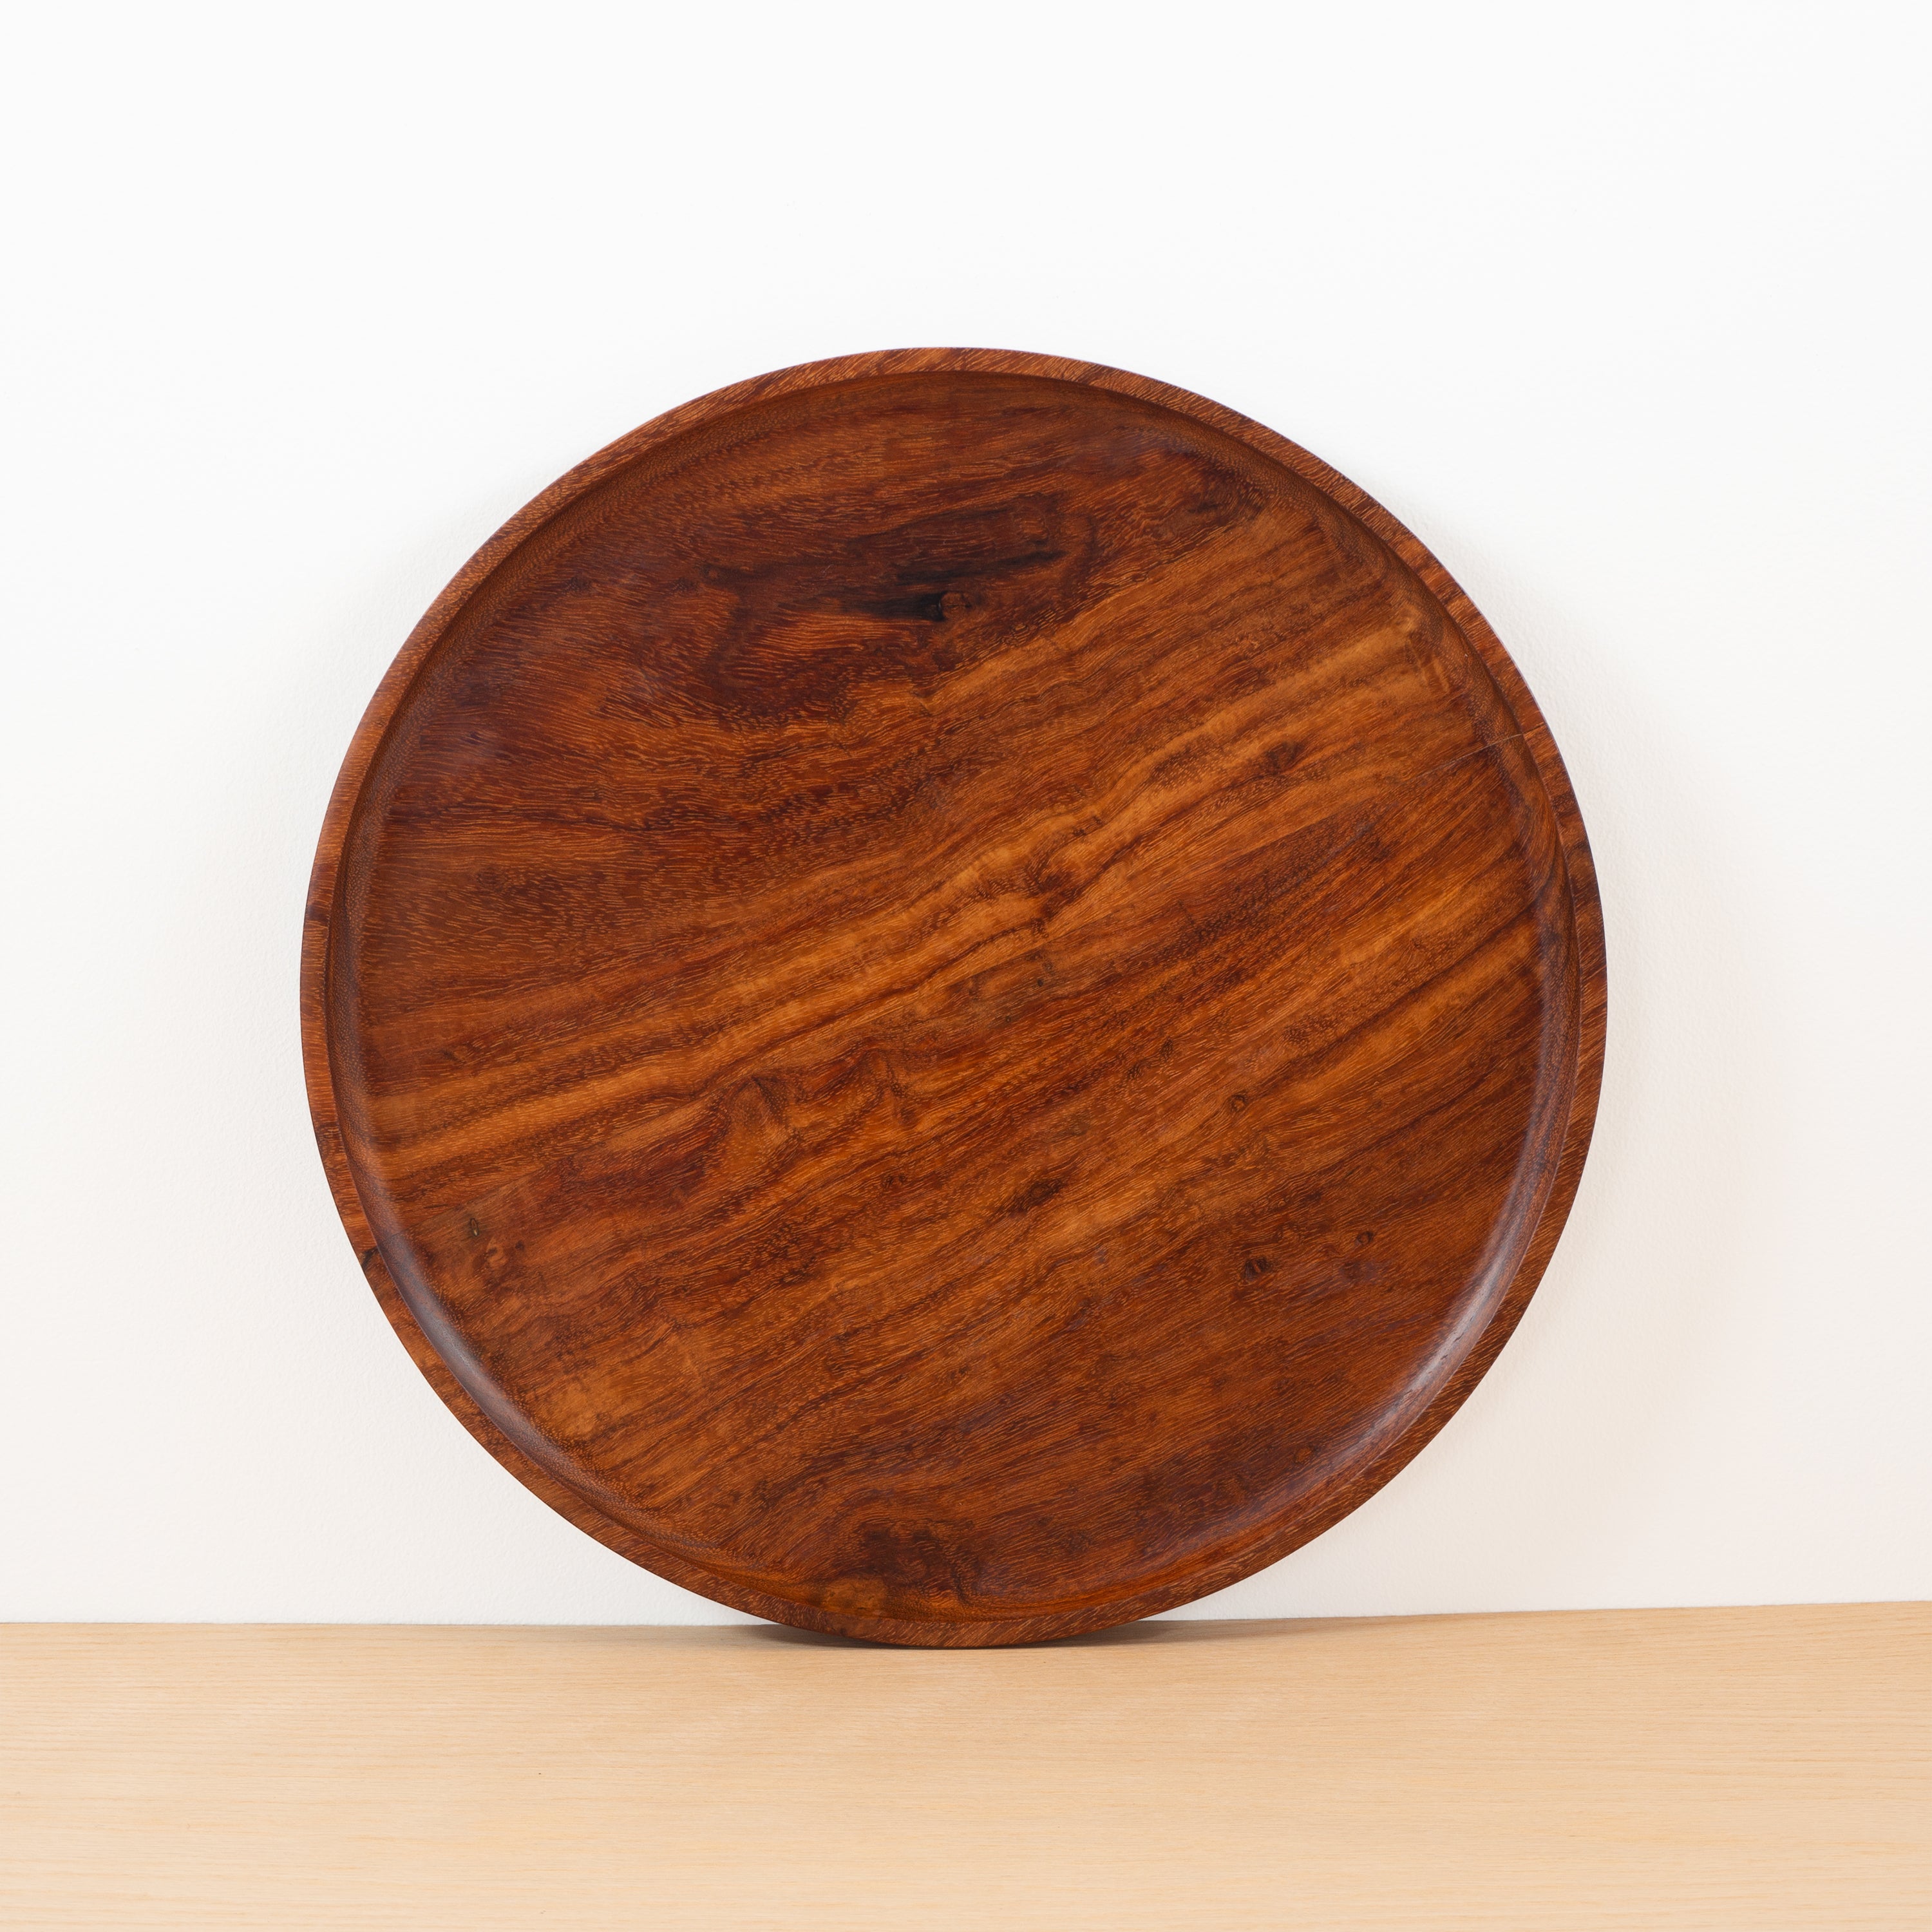 Handcarved granadillo wood round serving platter from the Peten jungle of Guatemala